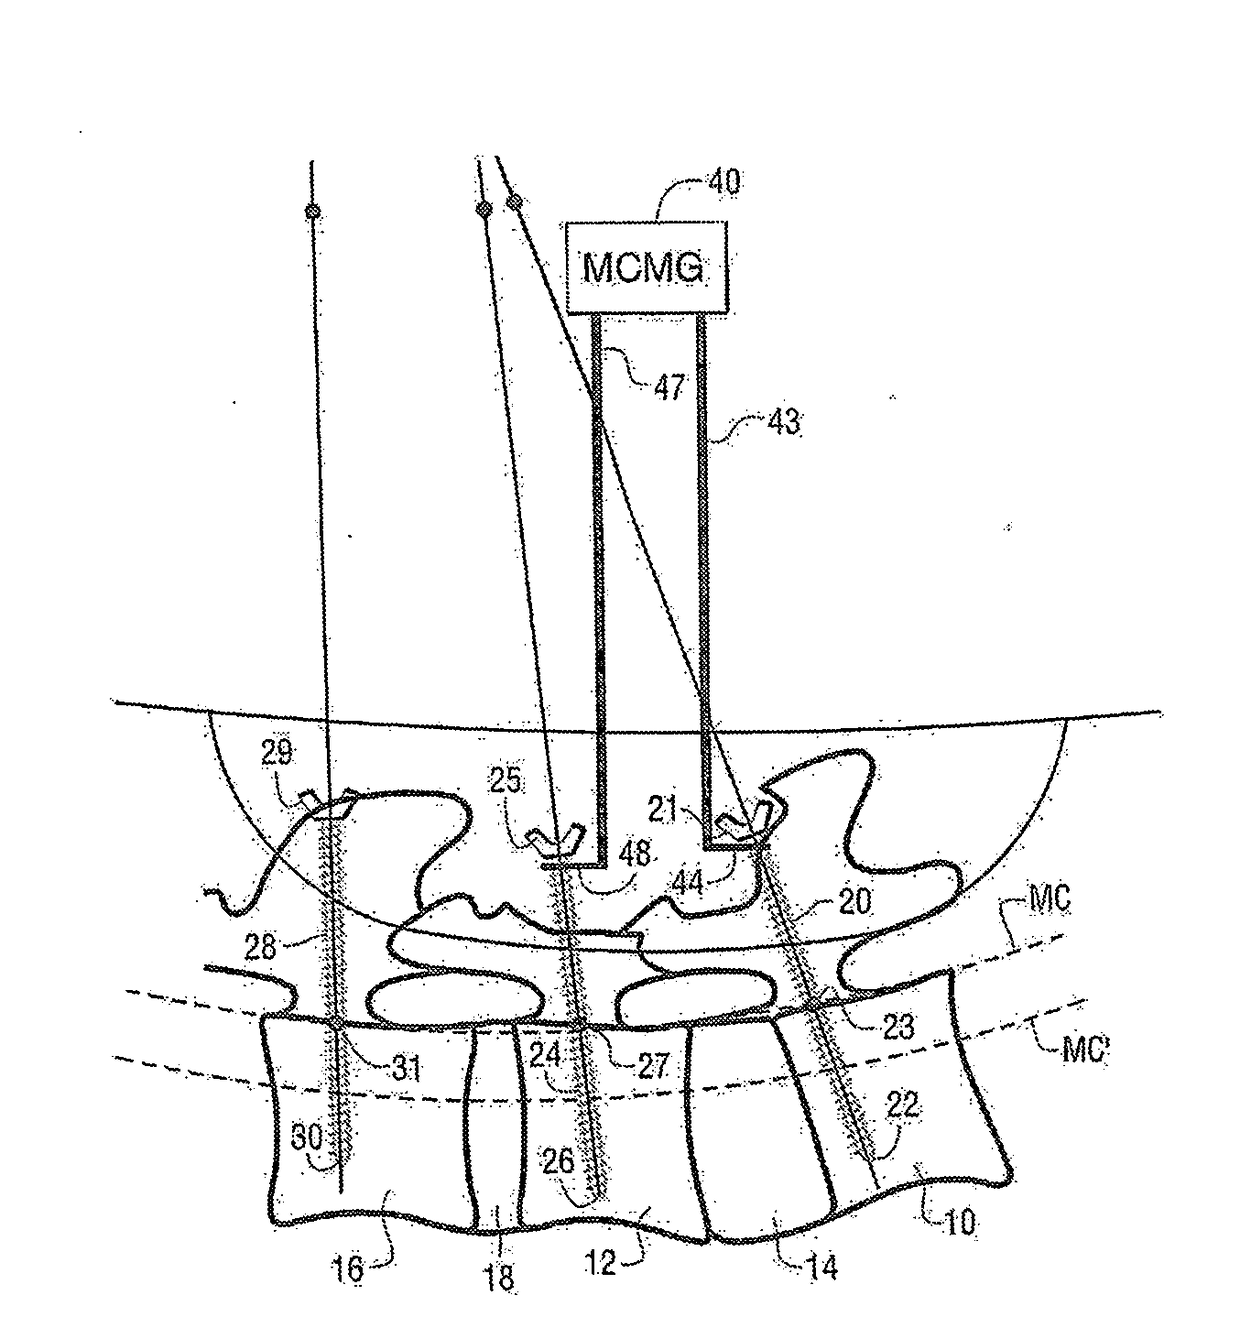 Methods and apparatus for spinal reconstructive surgery and measuring spinal length and intervertebral spacing, tension and rotation